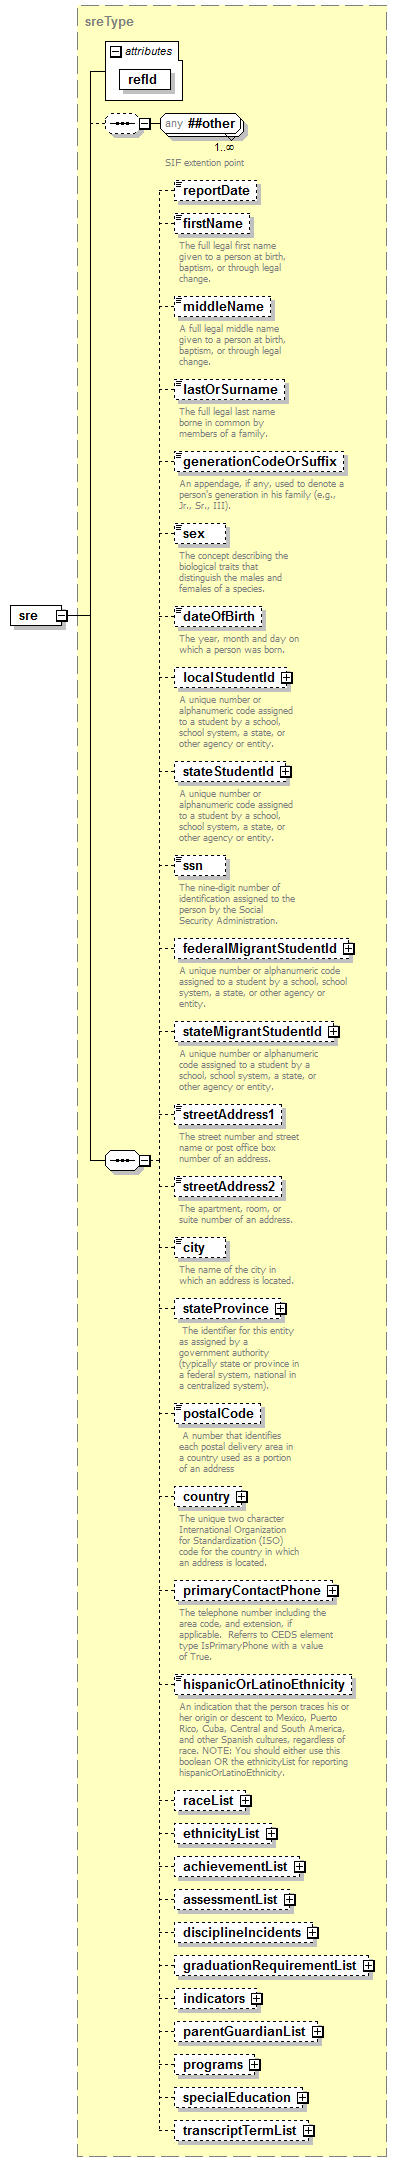 ReportObjects_diagrams/ReportObjects_p1.png